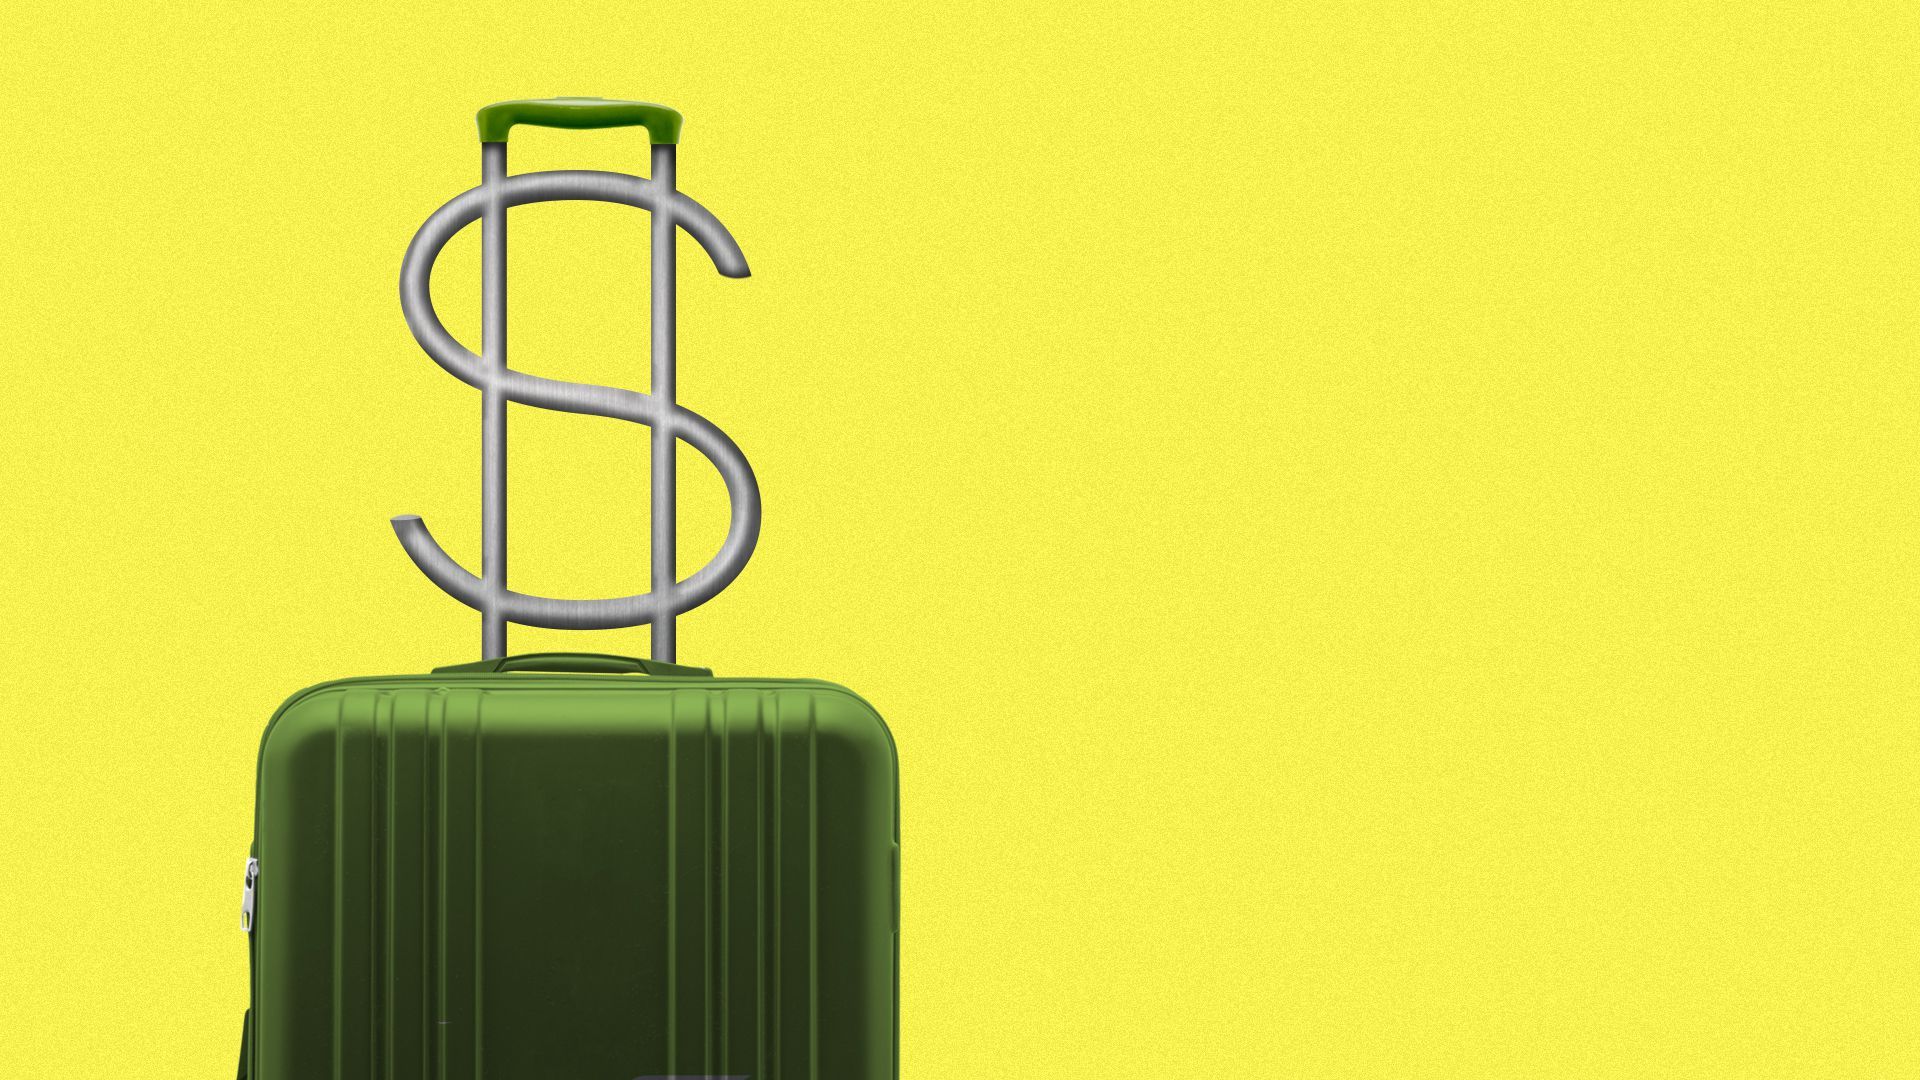 Illustration of a suitcase with arms shaped like a dollar sign